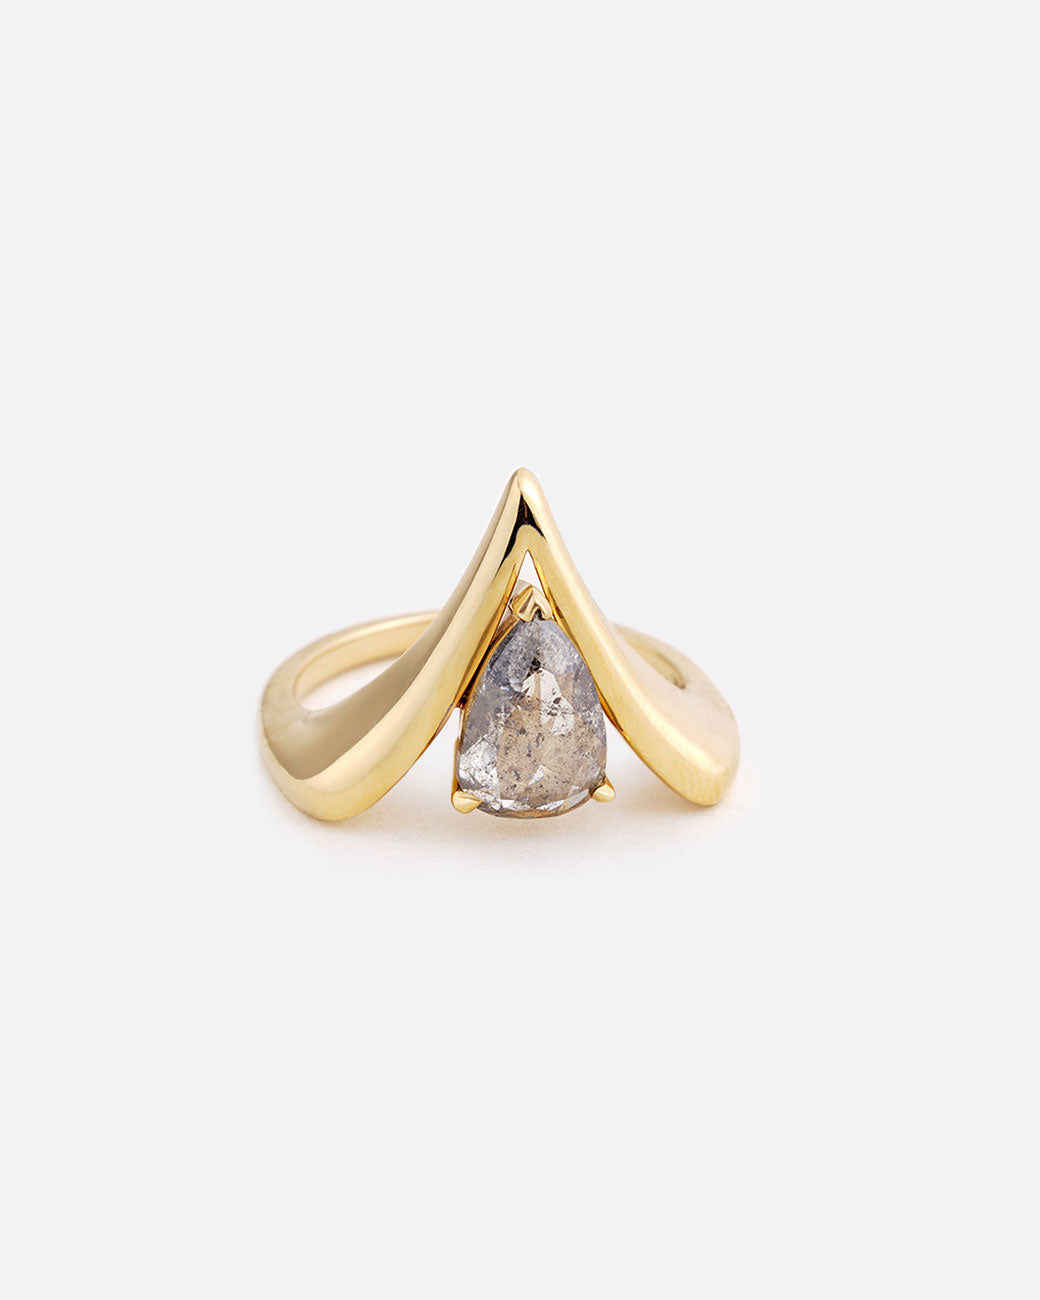 14k yellow gold V shaped ring with pear shaped salt and pepper diamond by Maggi Simpkins.